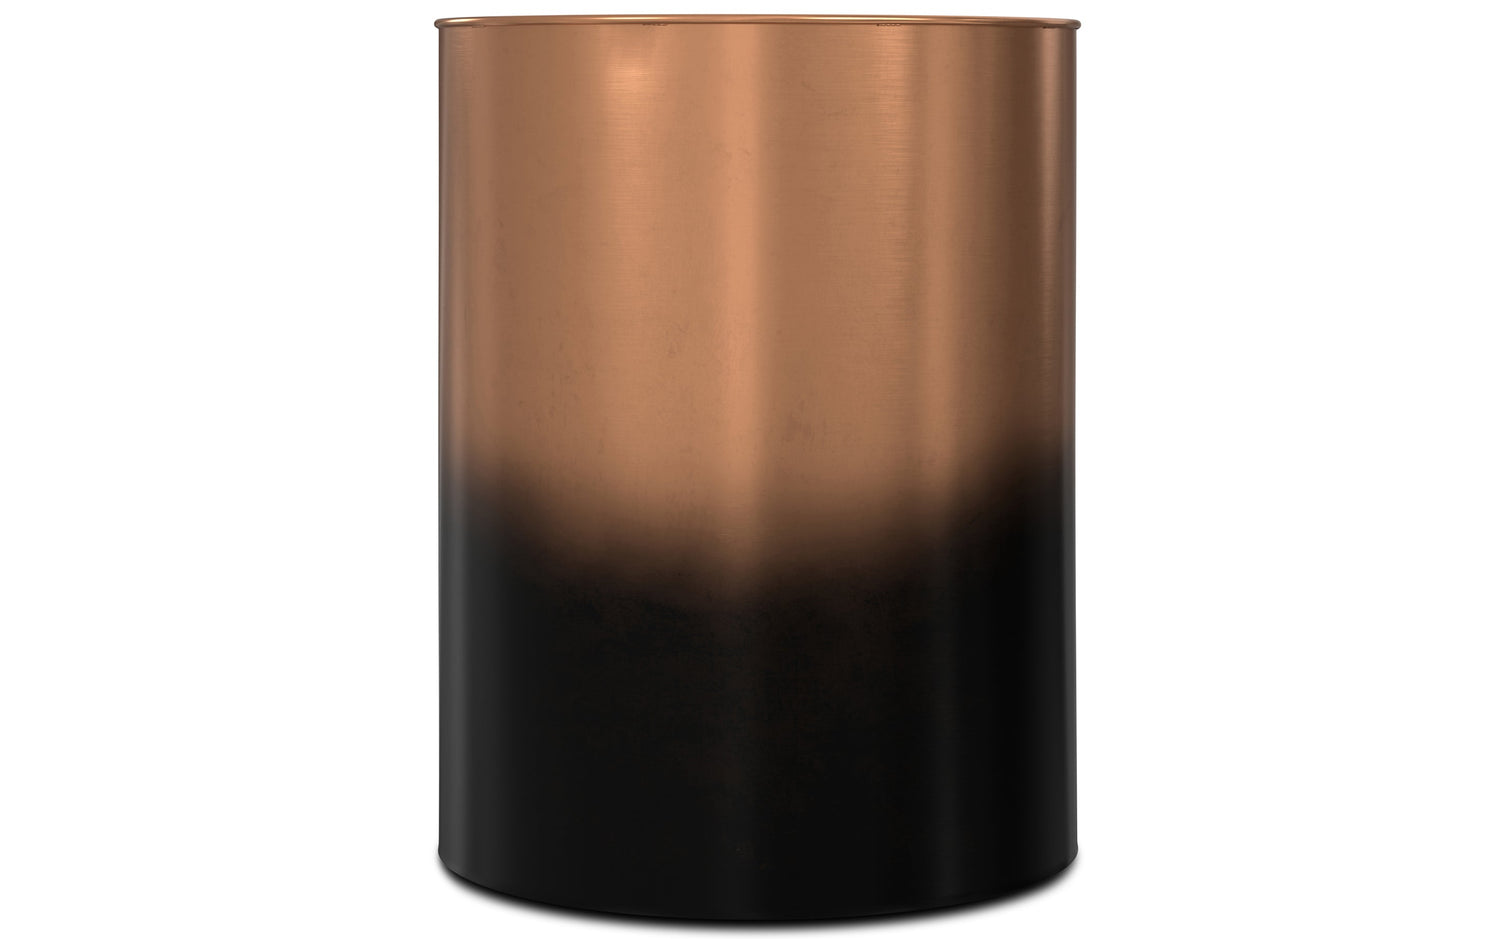 Ombre Black and Copper | Curtis Metal Cylinder Accent Table